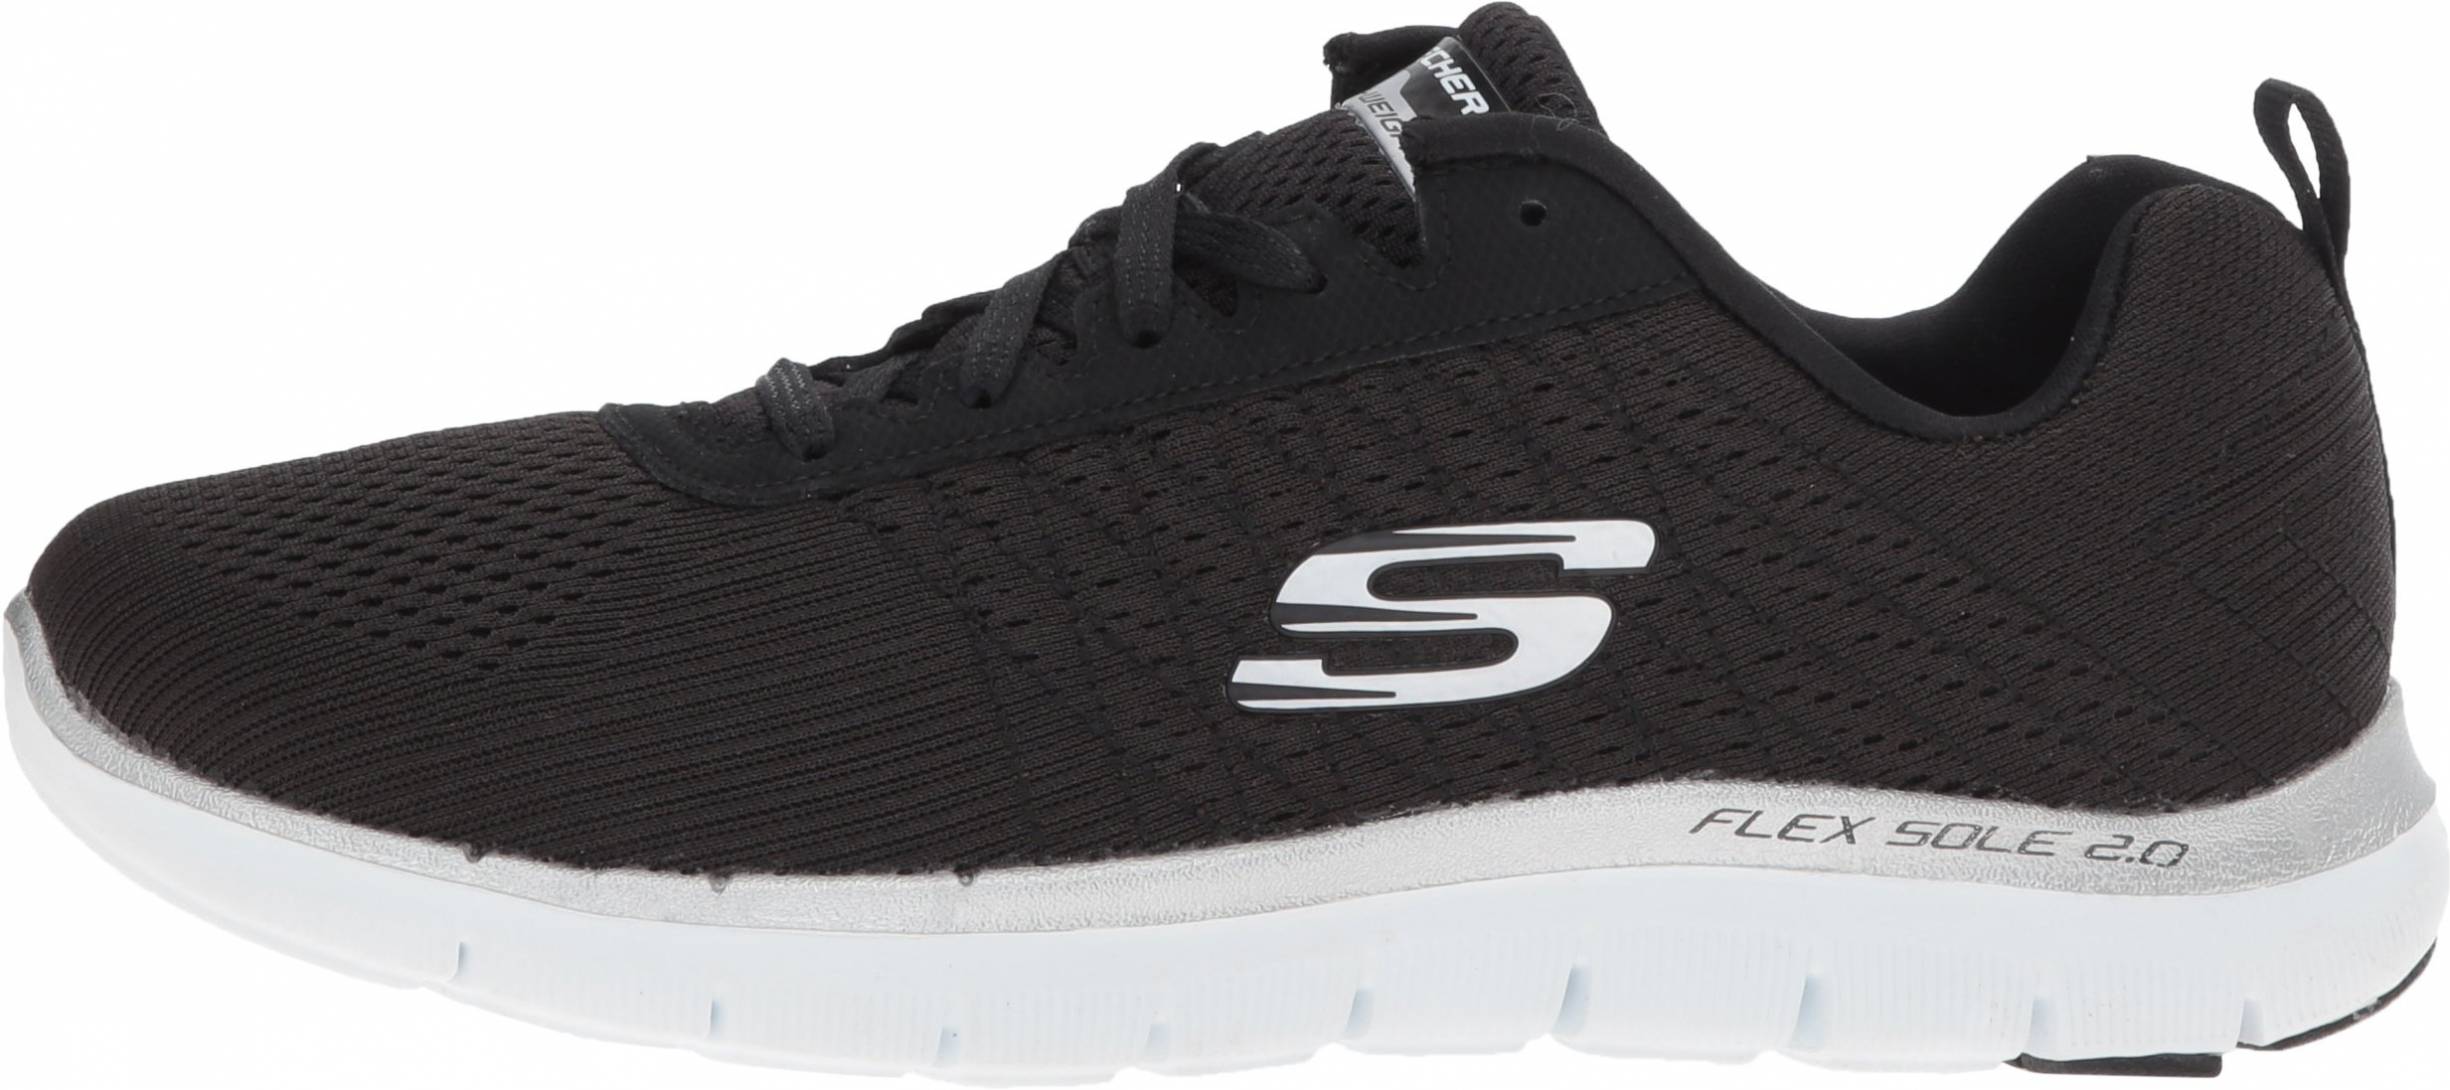 skechers flex appeal 2. black and white